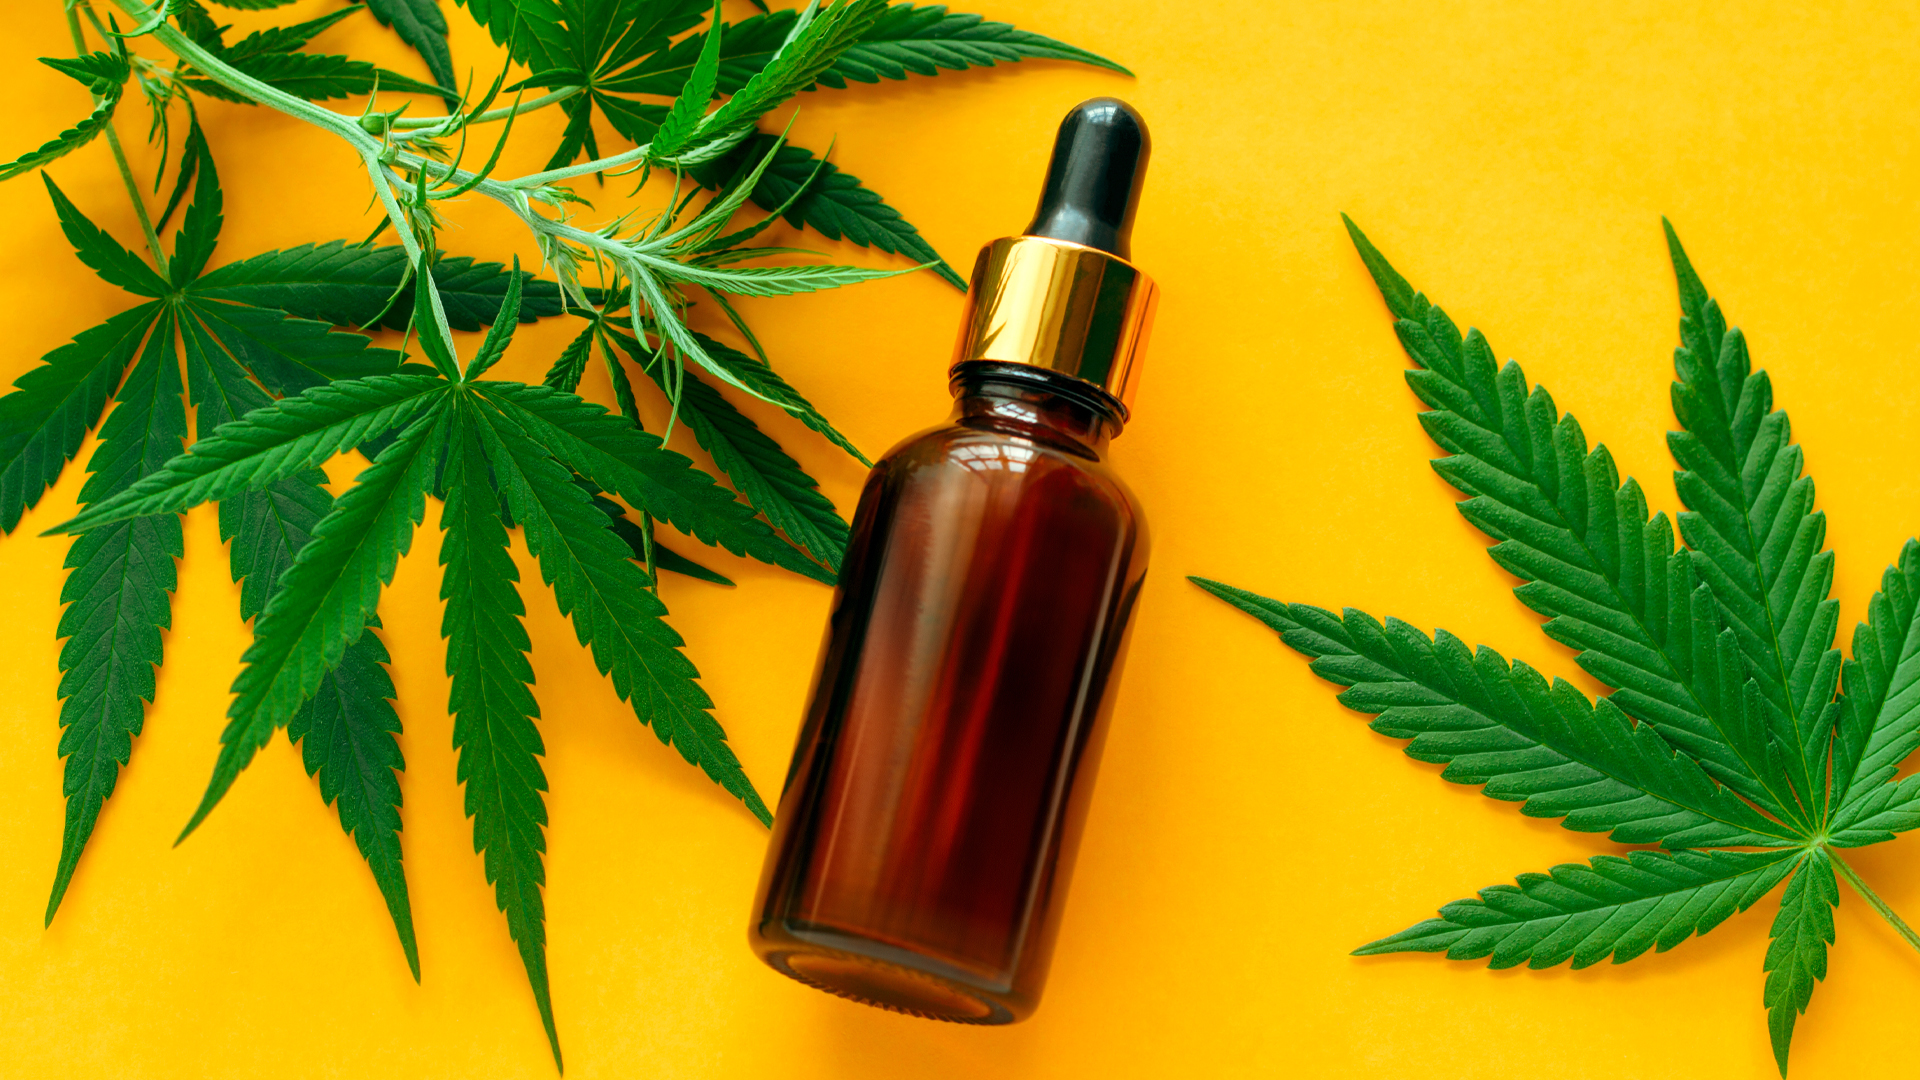 What do You need To Know And Avoid For Using Cannabidiol?